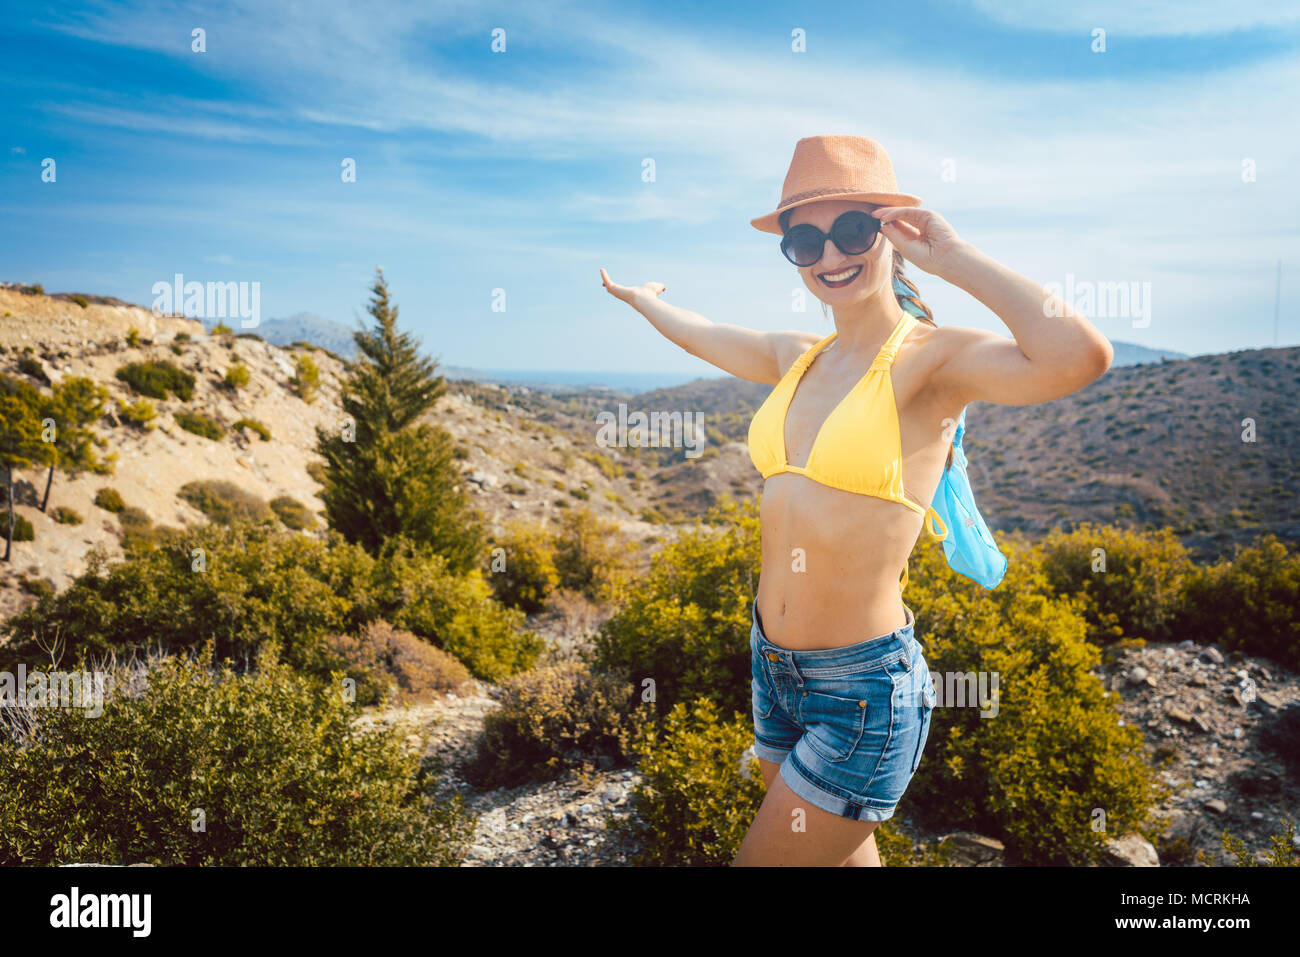 Woman tourist in front of southern European landscape Stock Photo